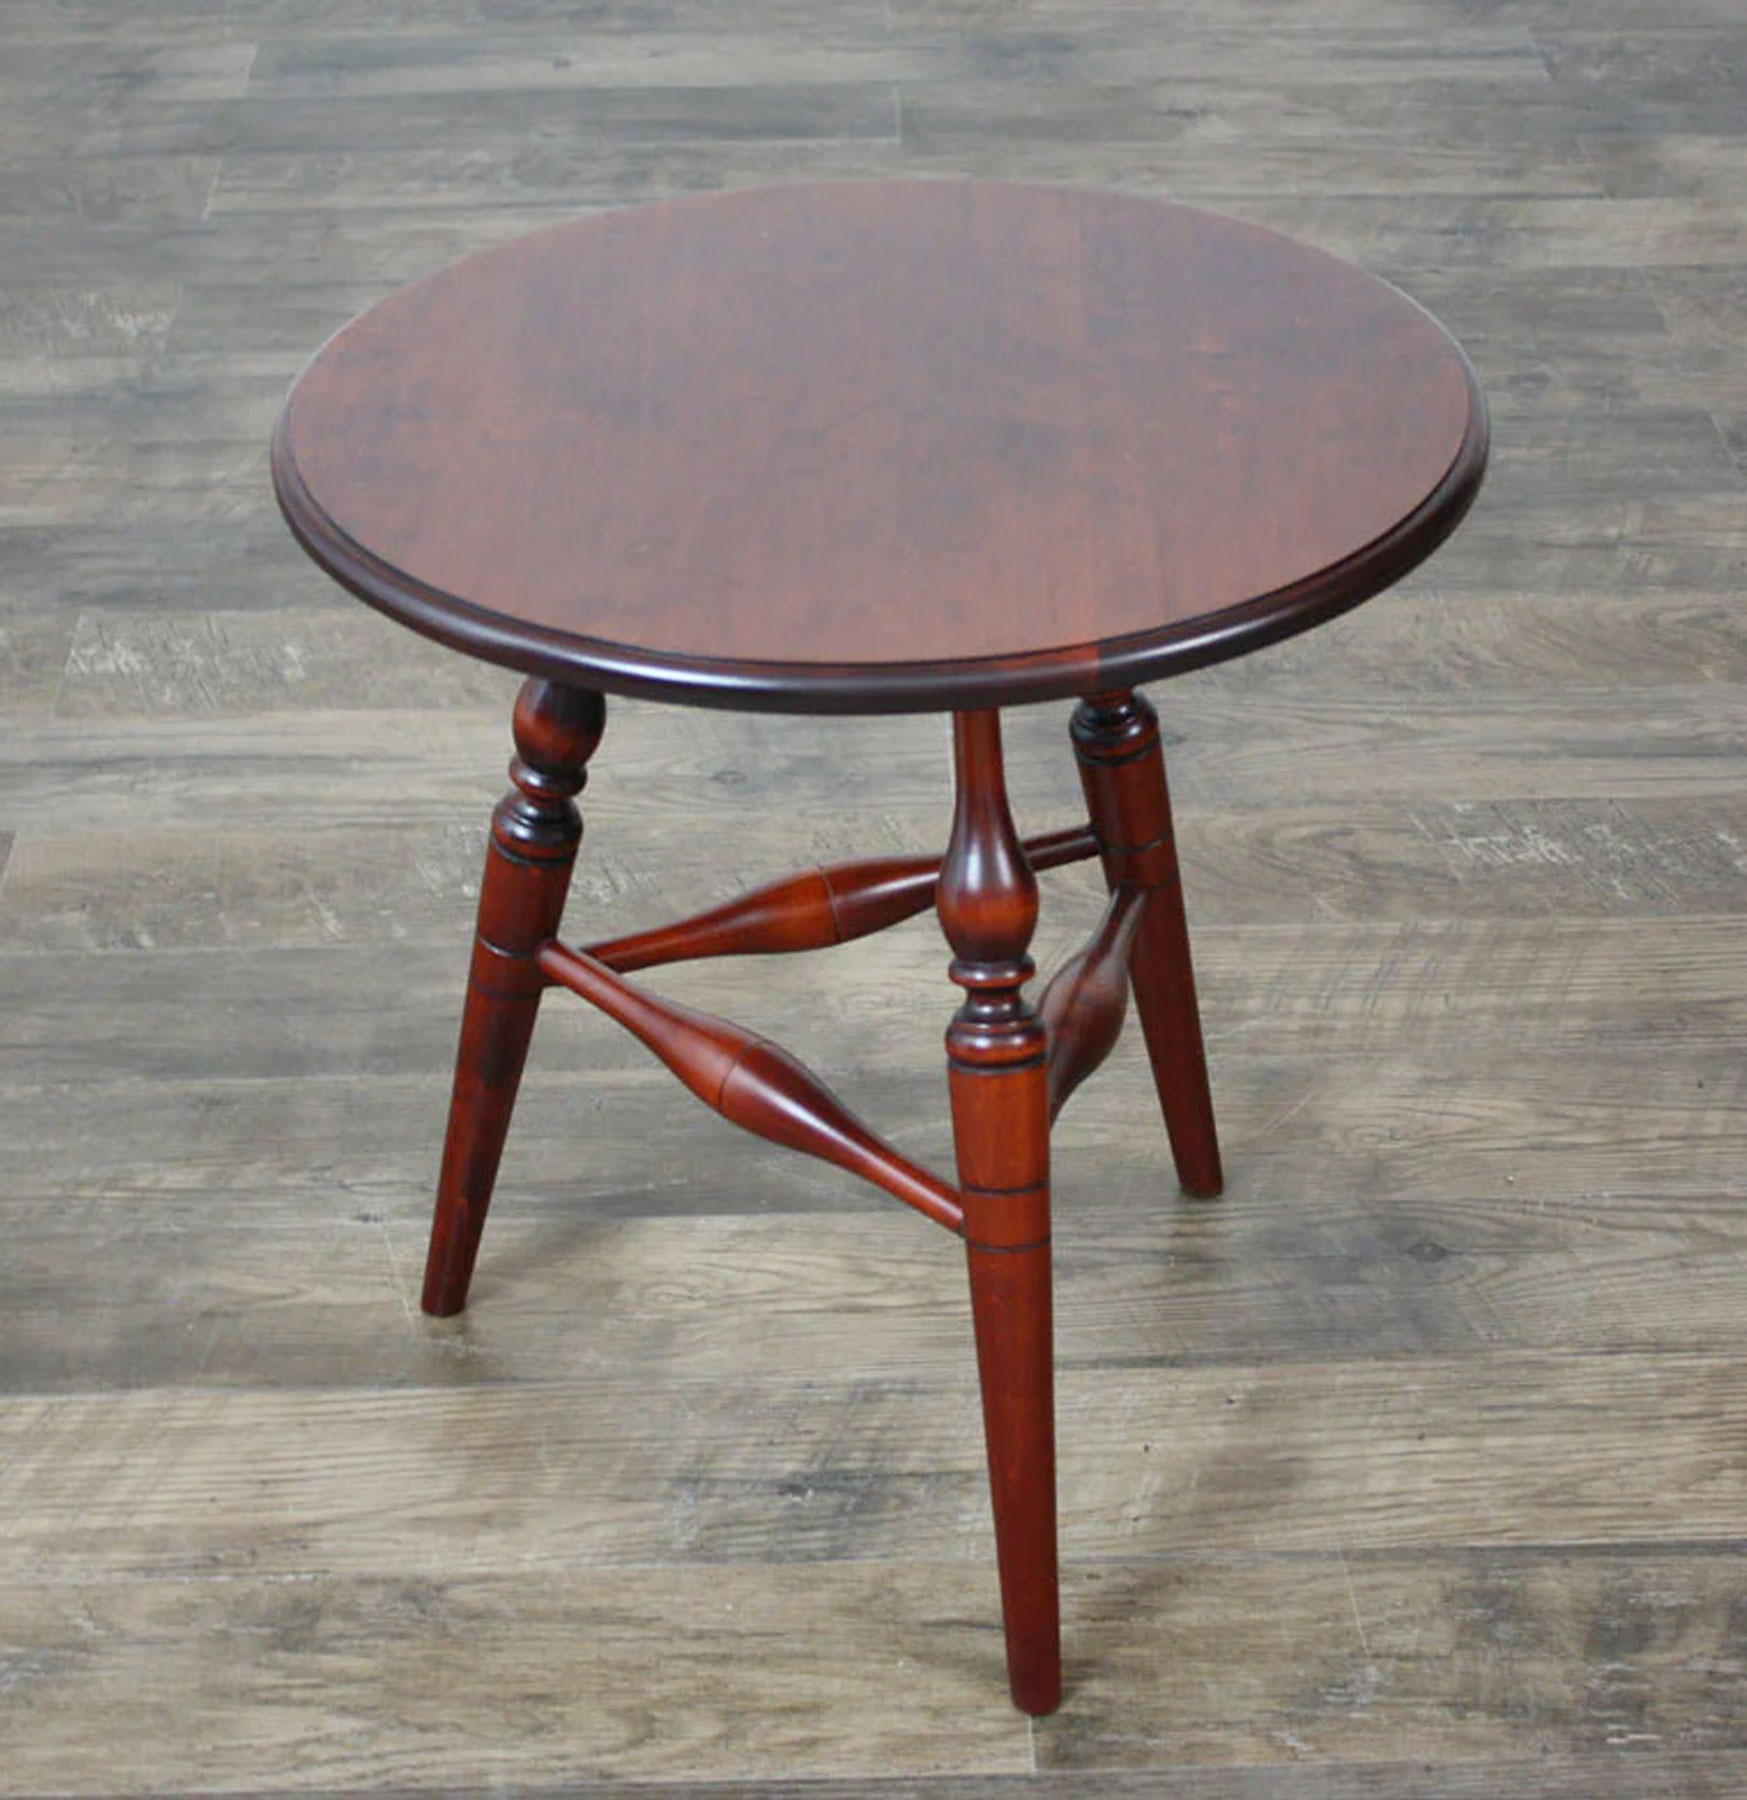 Treharn Windsor Small End Table in Cherry